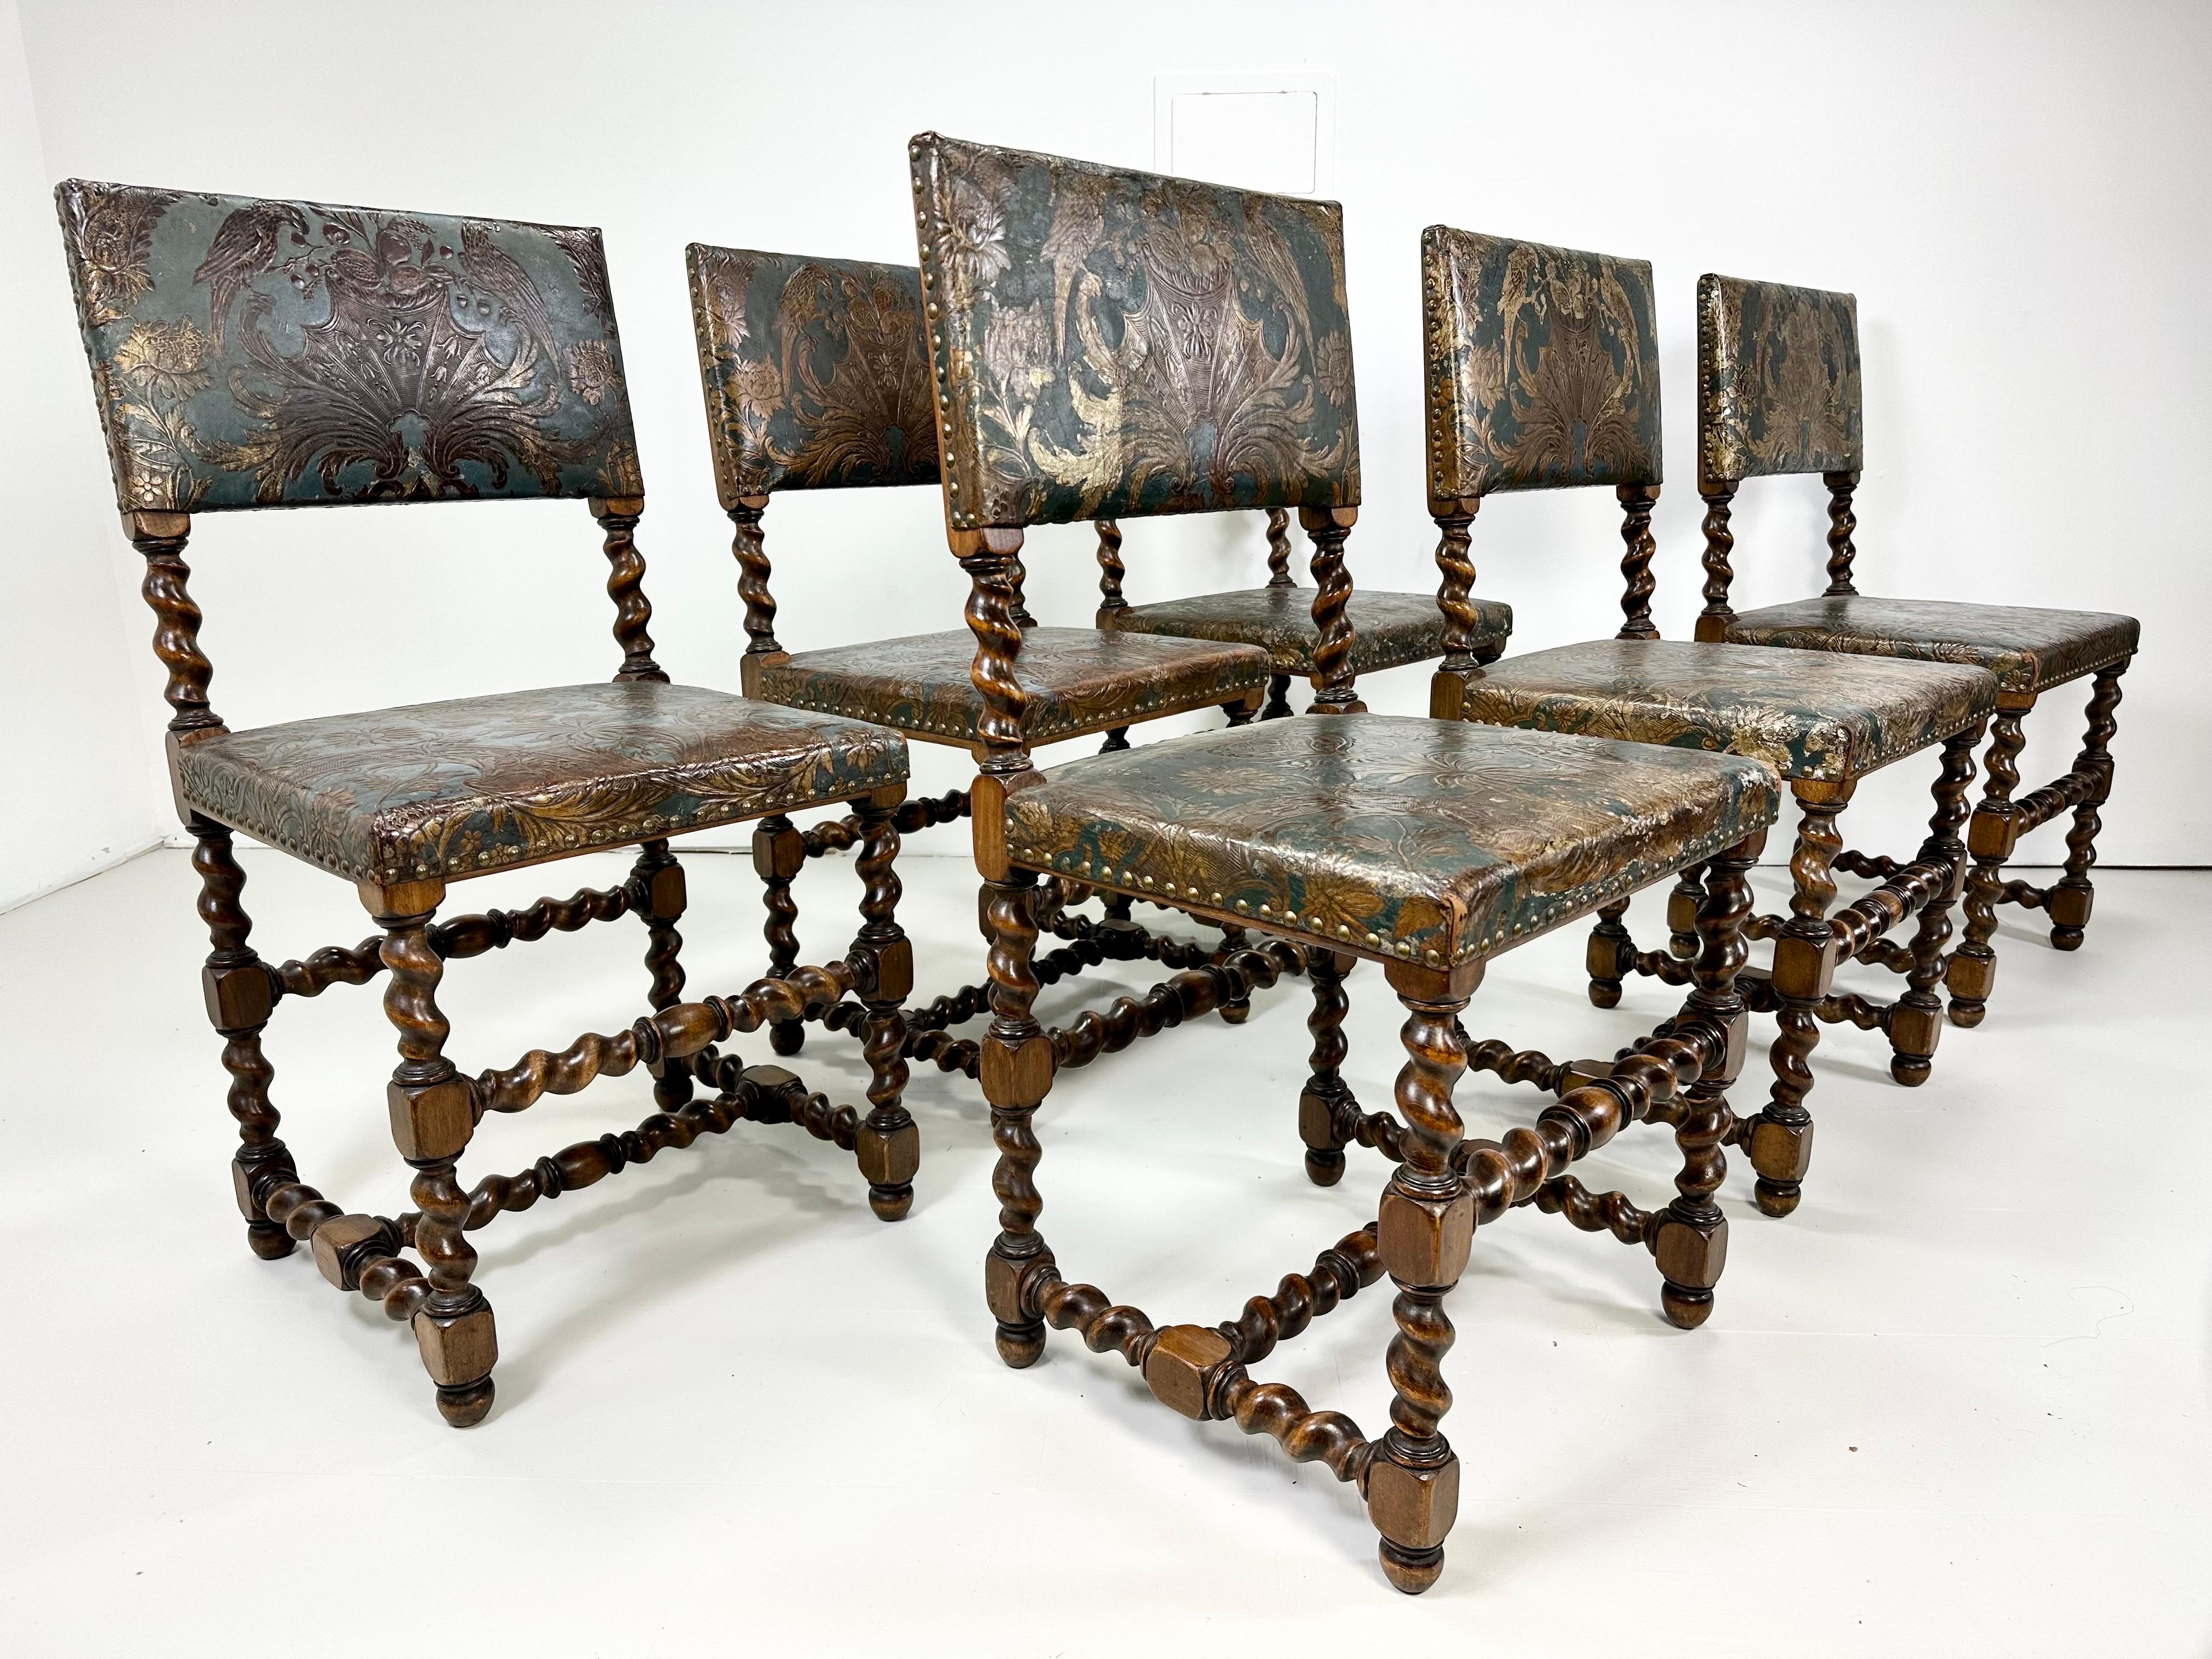 Set of six Baroque style dinning chairs. Exquisite gilt leather seats and back. Turned Beech wood frames. Sweden

Delivery to NYC area for $375. Please inquire.